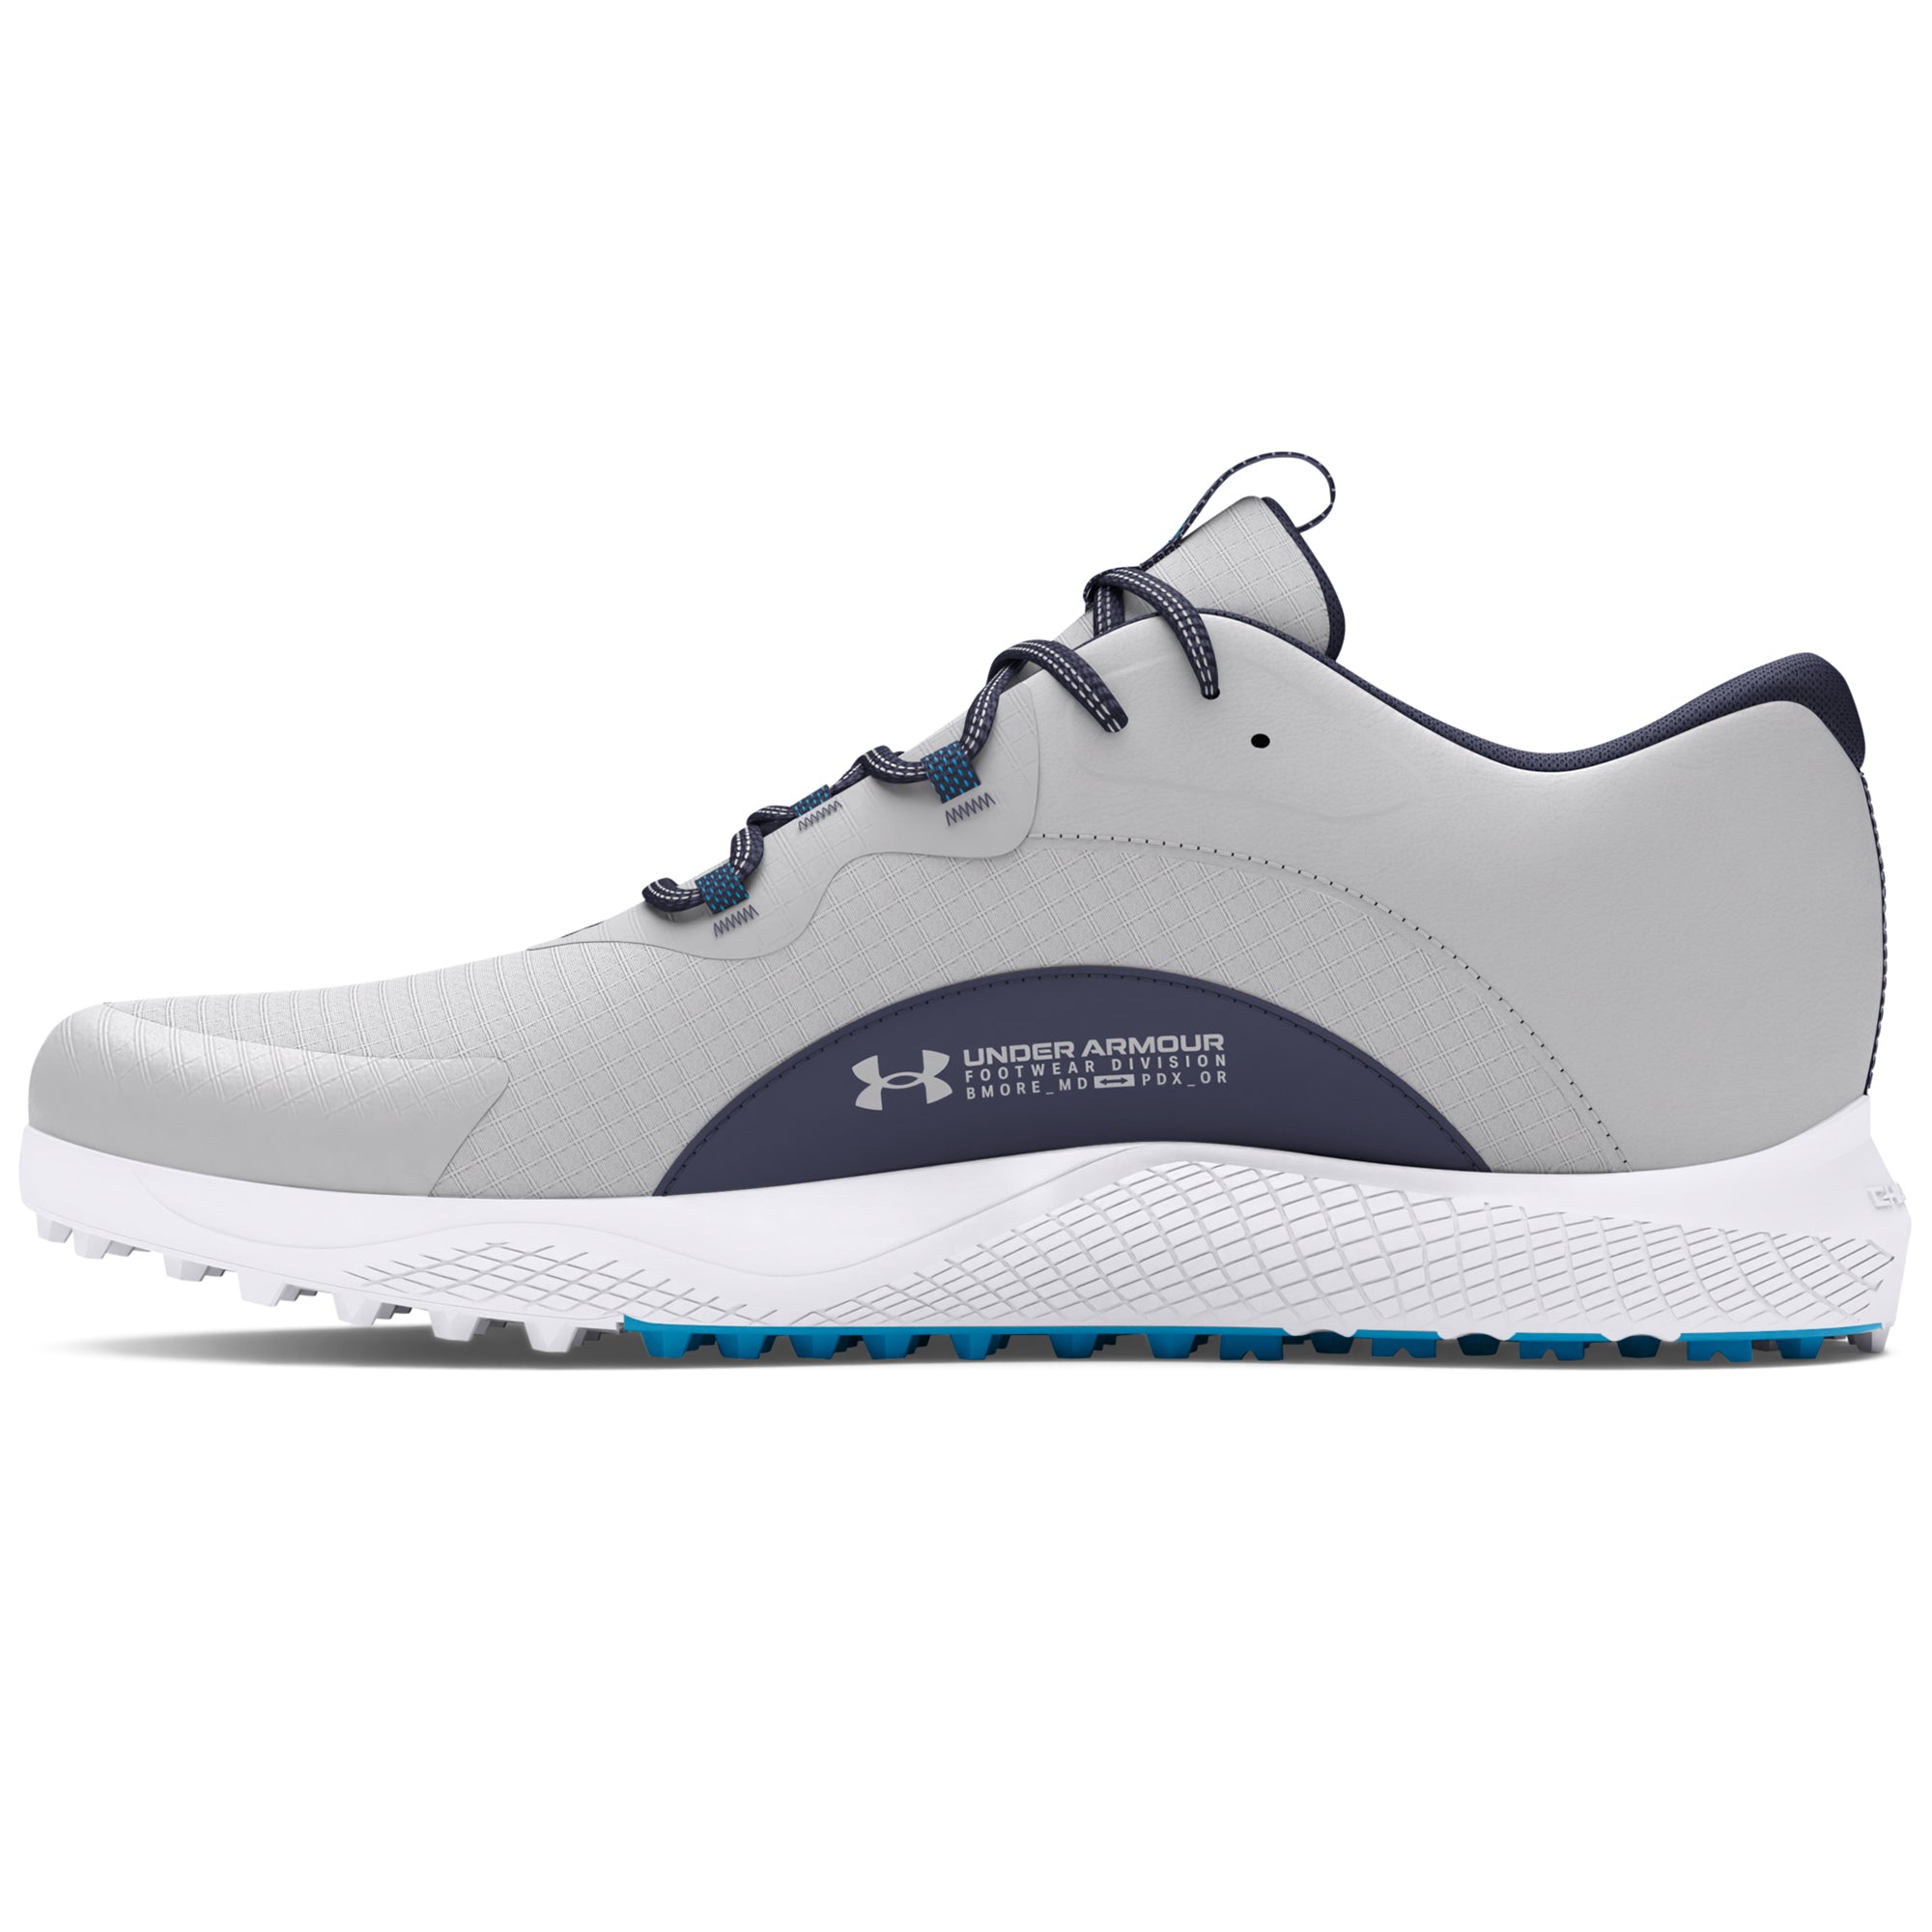 Under Armour Charged Draw 2 SL Golf Shoes